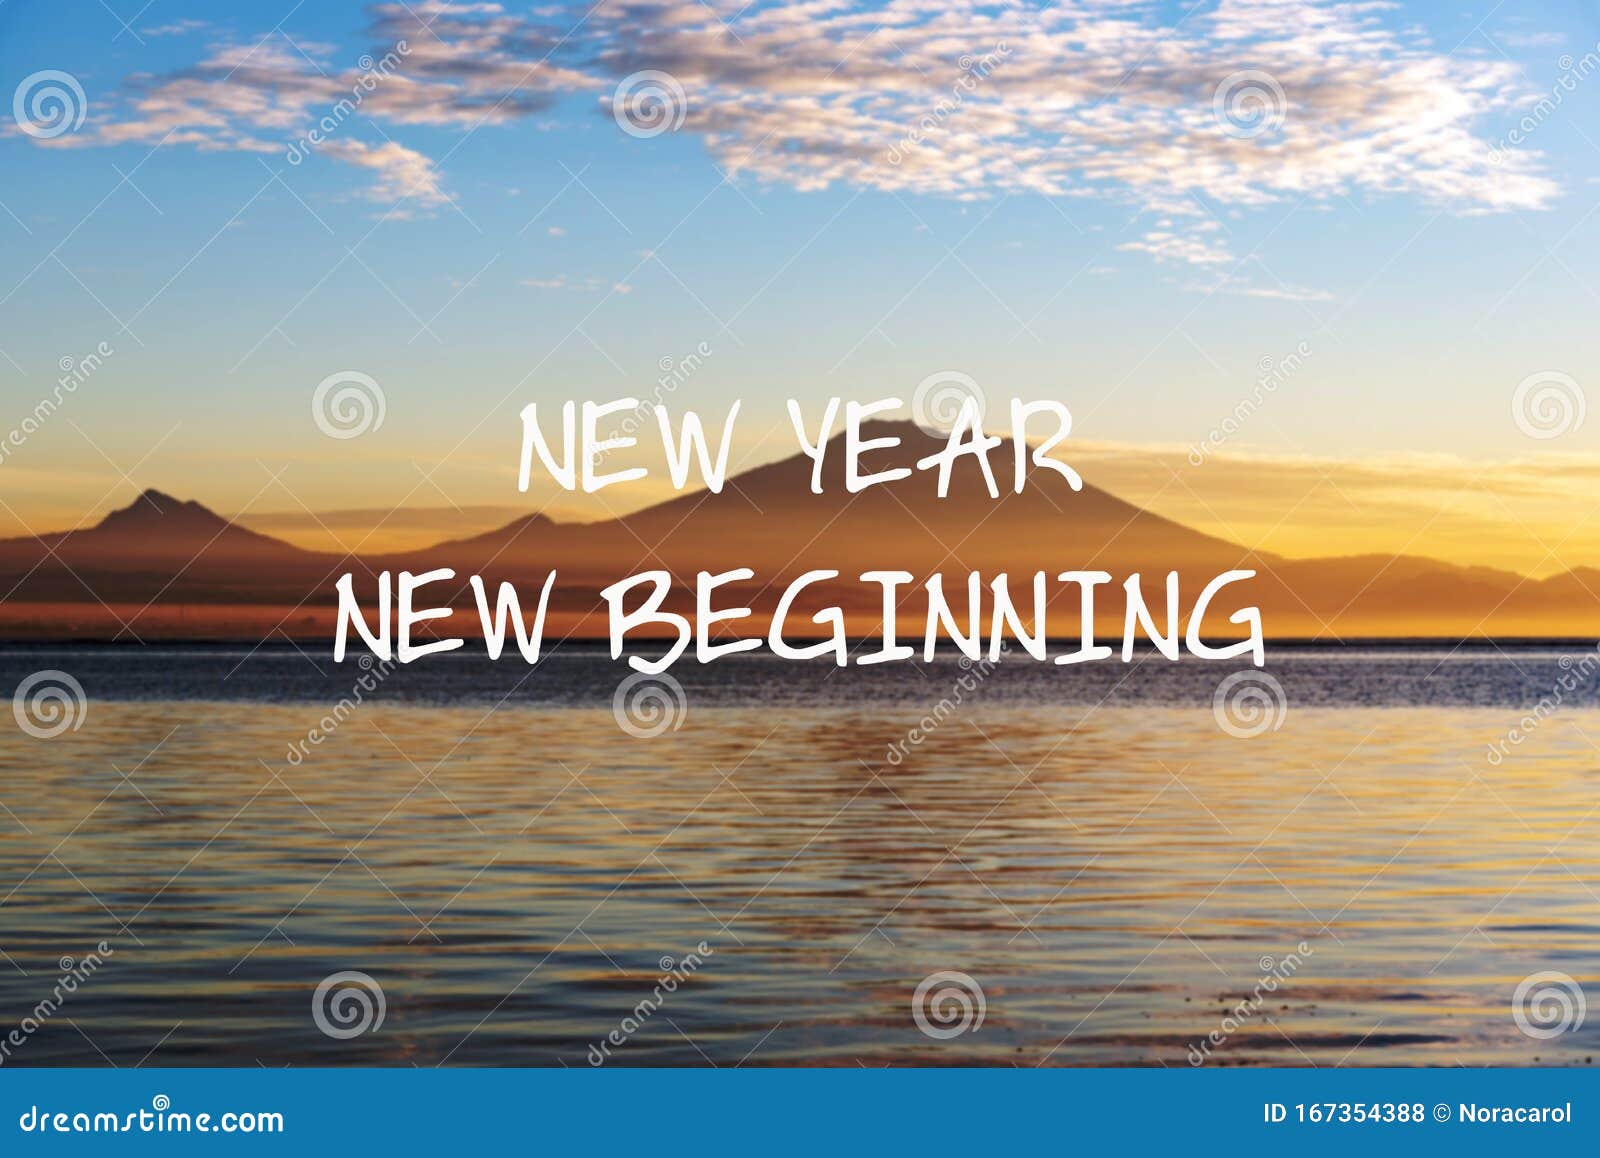 Inspirational Quotes - New Year New Beginning Stock Photo - Image of